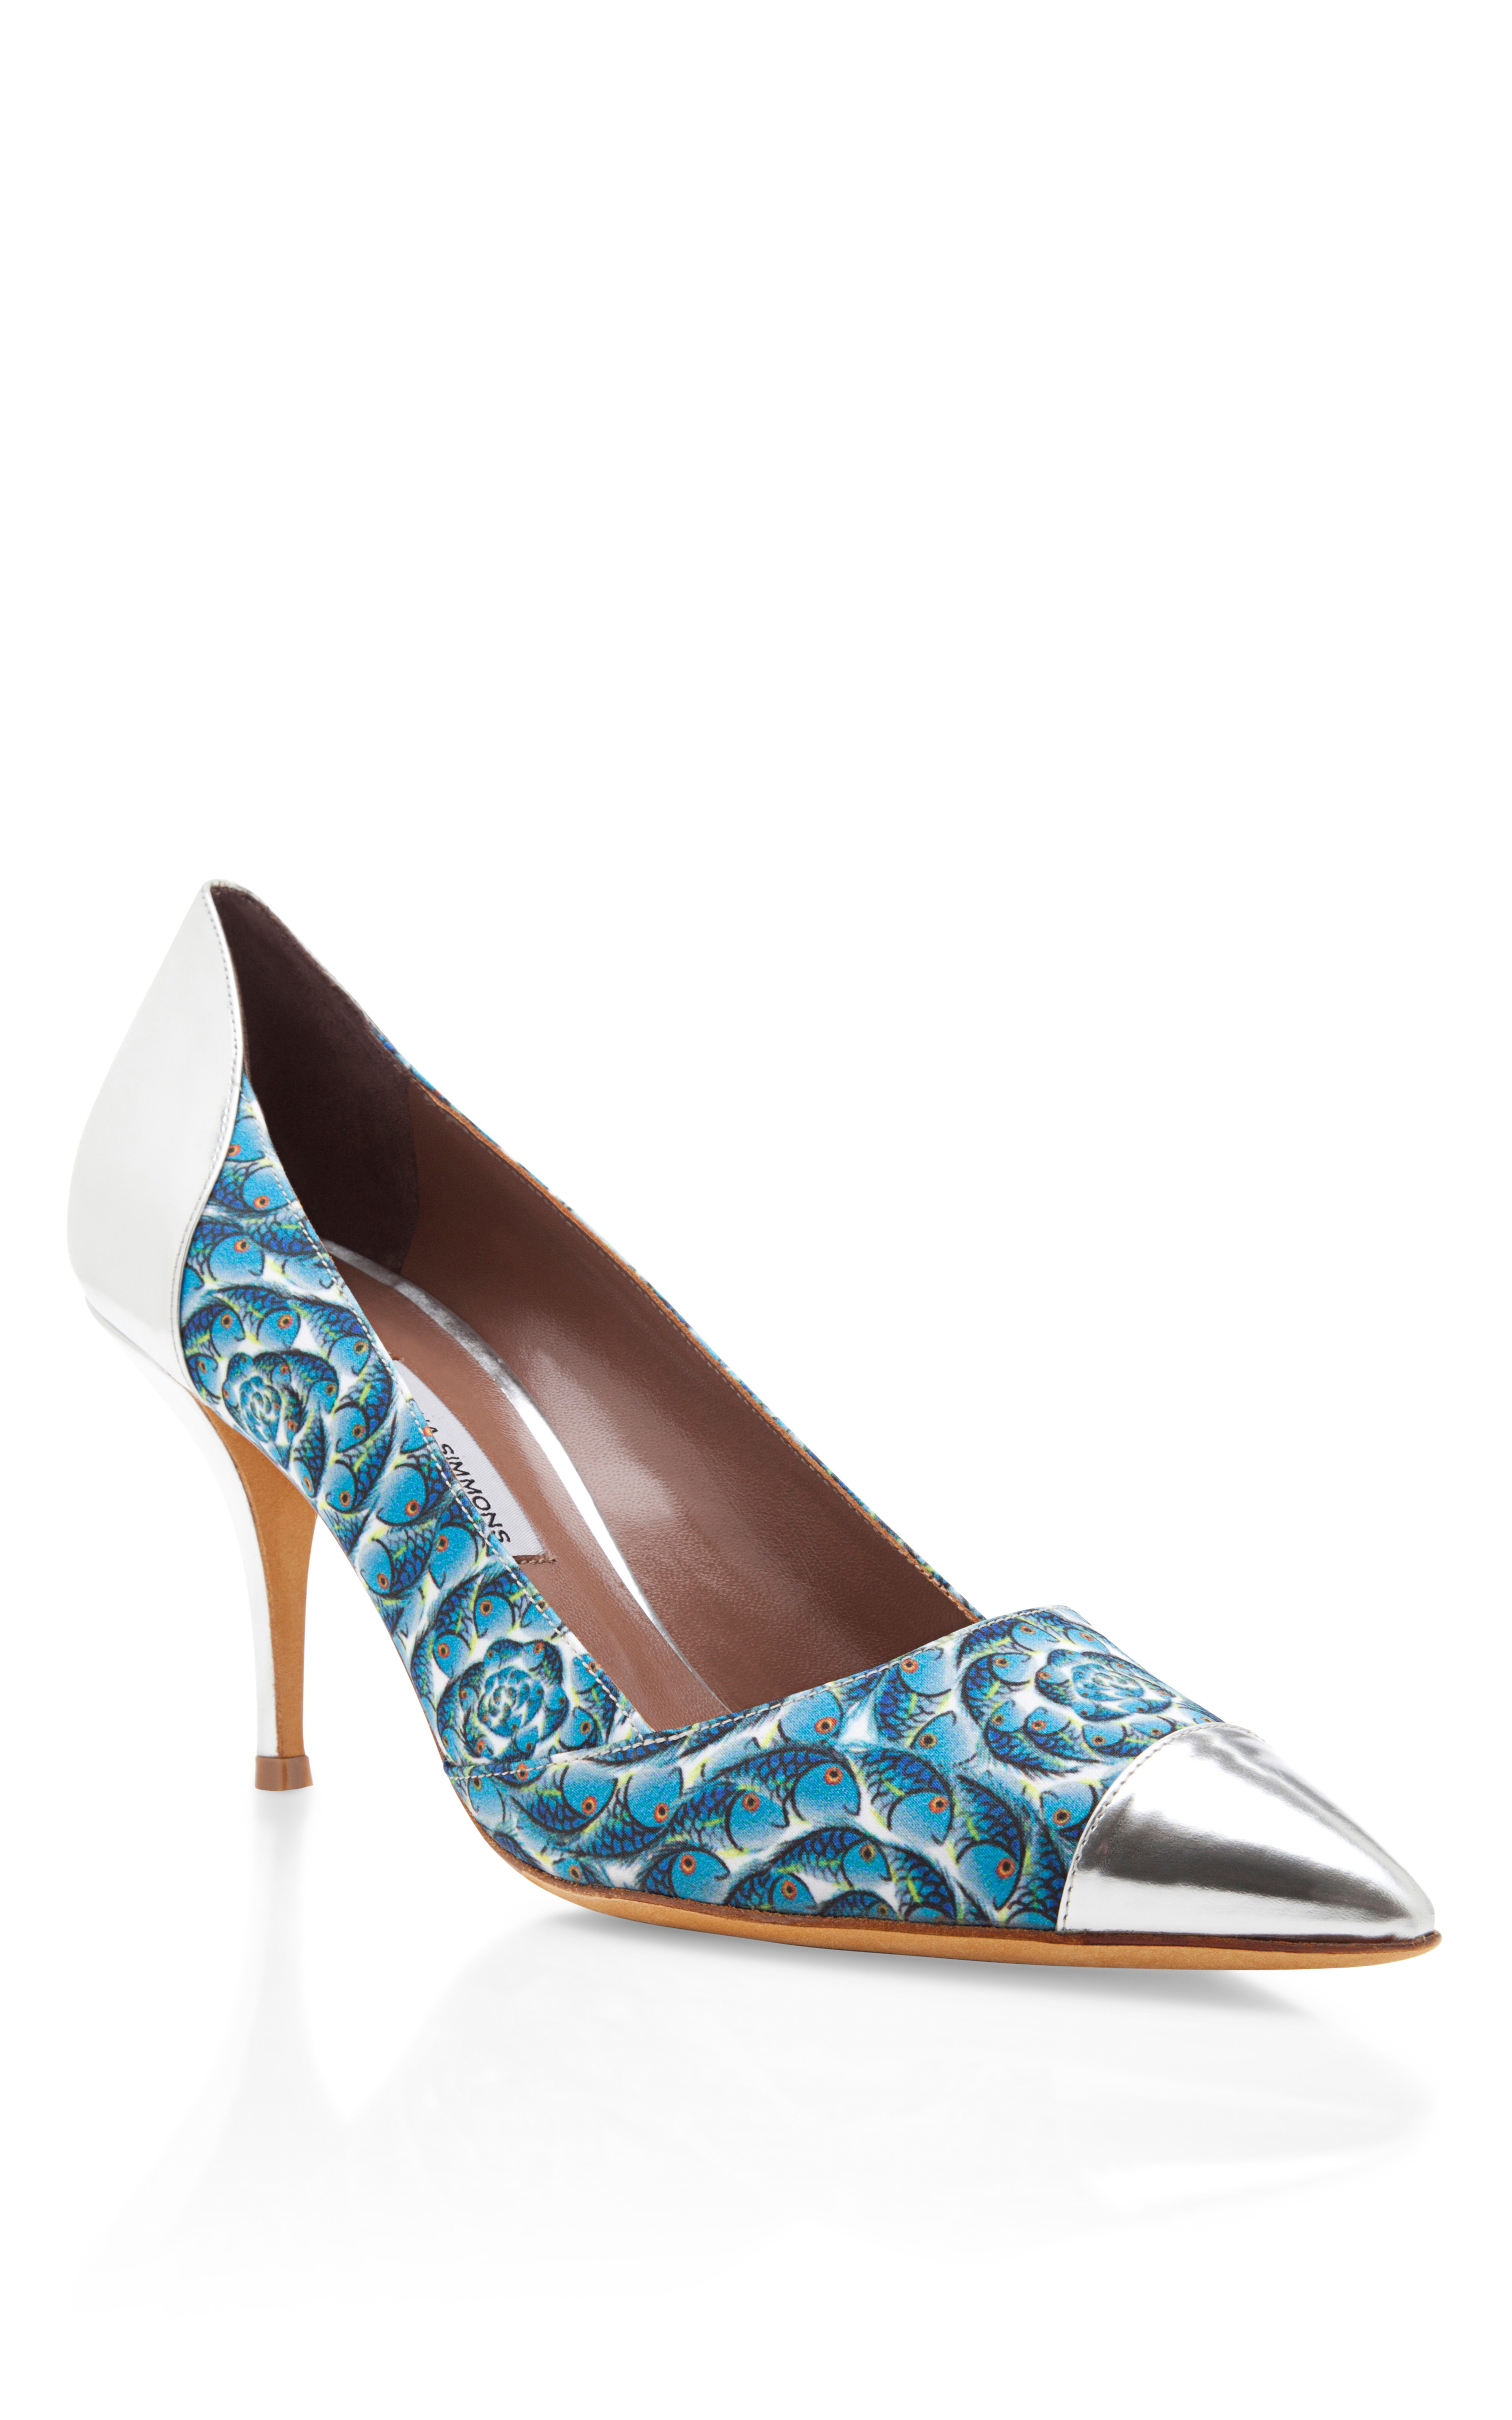 Tabitha Simmons Wink Blue Fish Print Heel with Silver Pointed Toe in ...